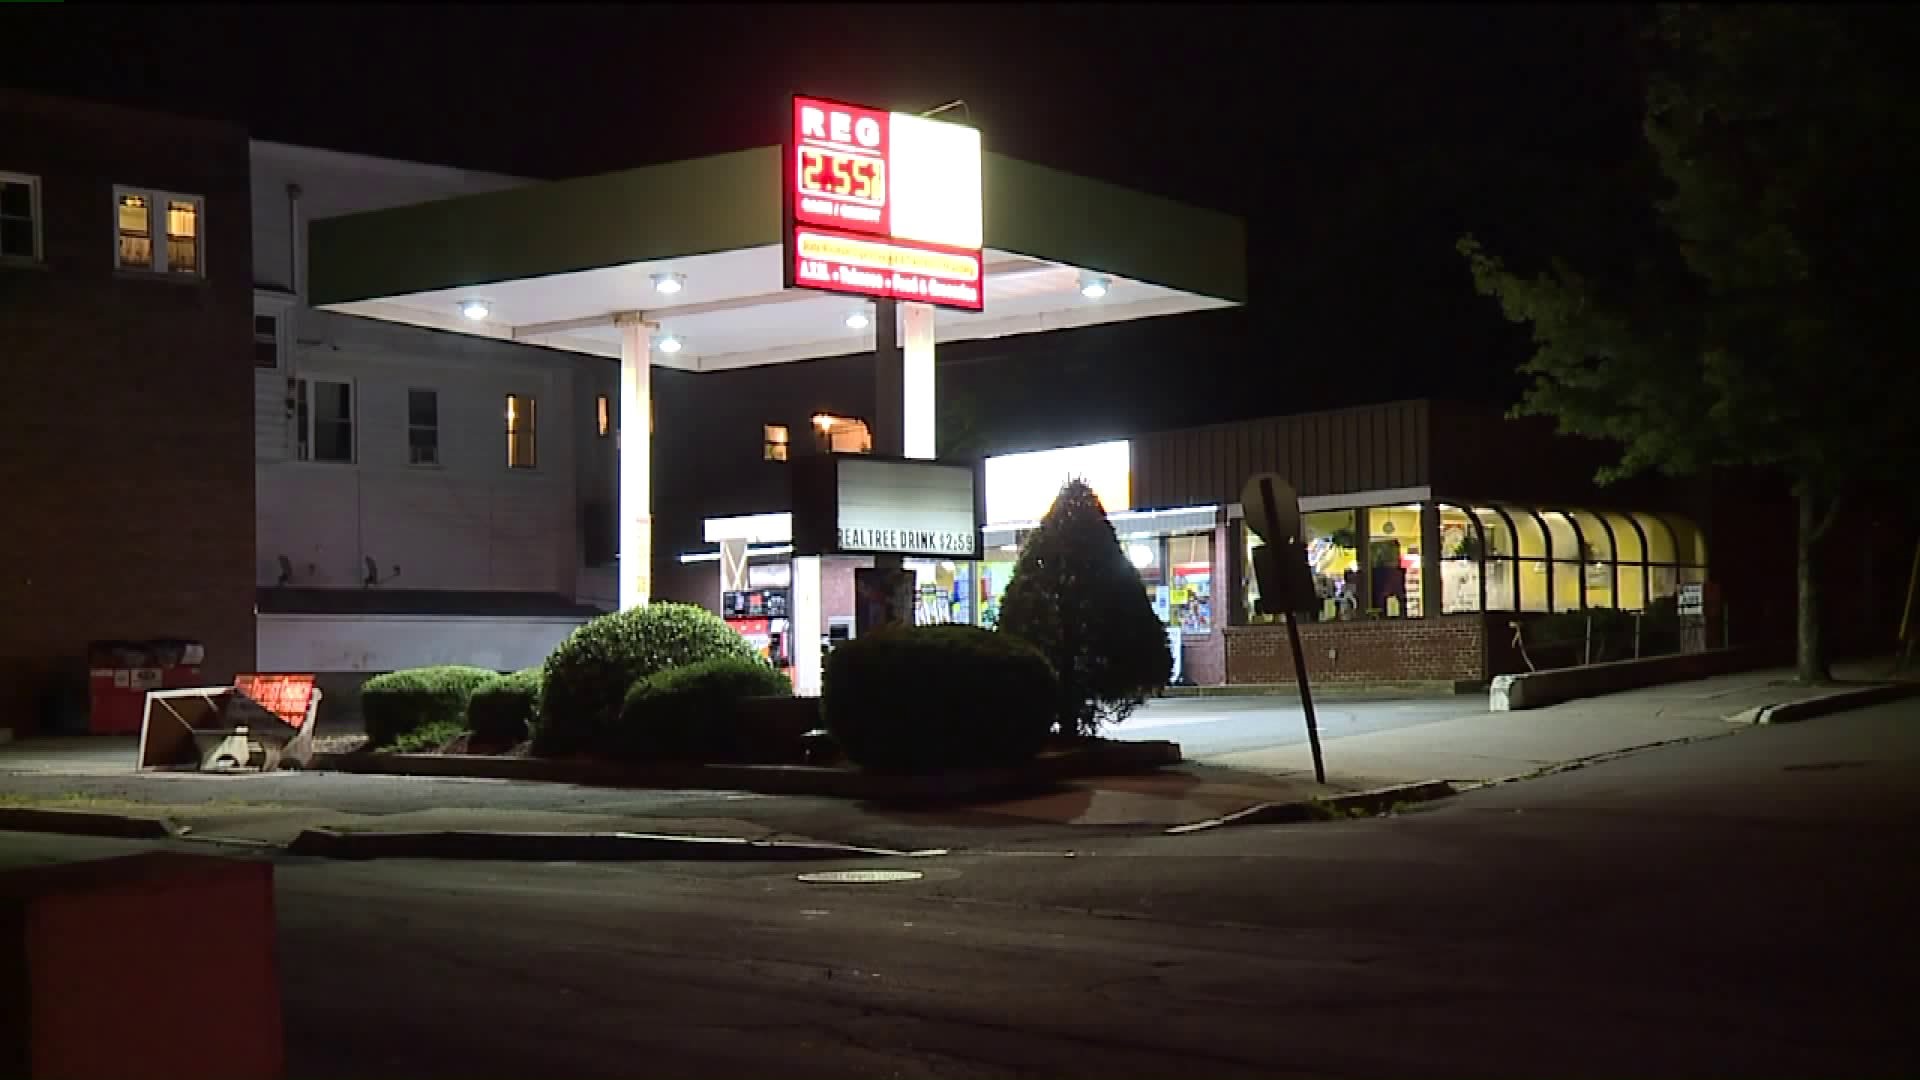 Armed Robbers Hit Convenience Store Second Time This Week